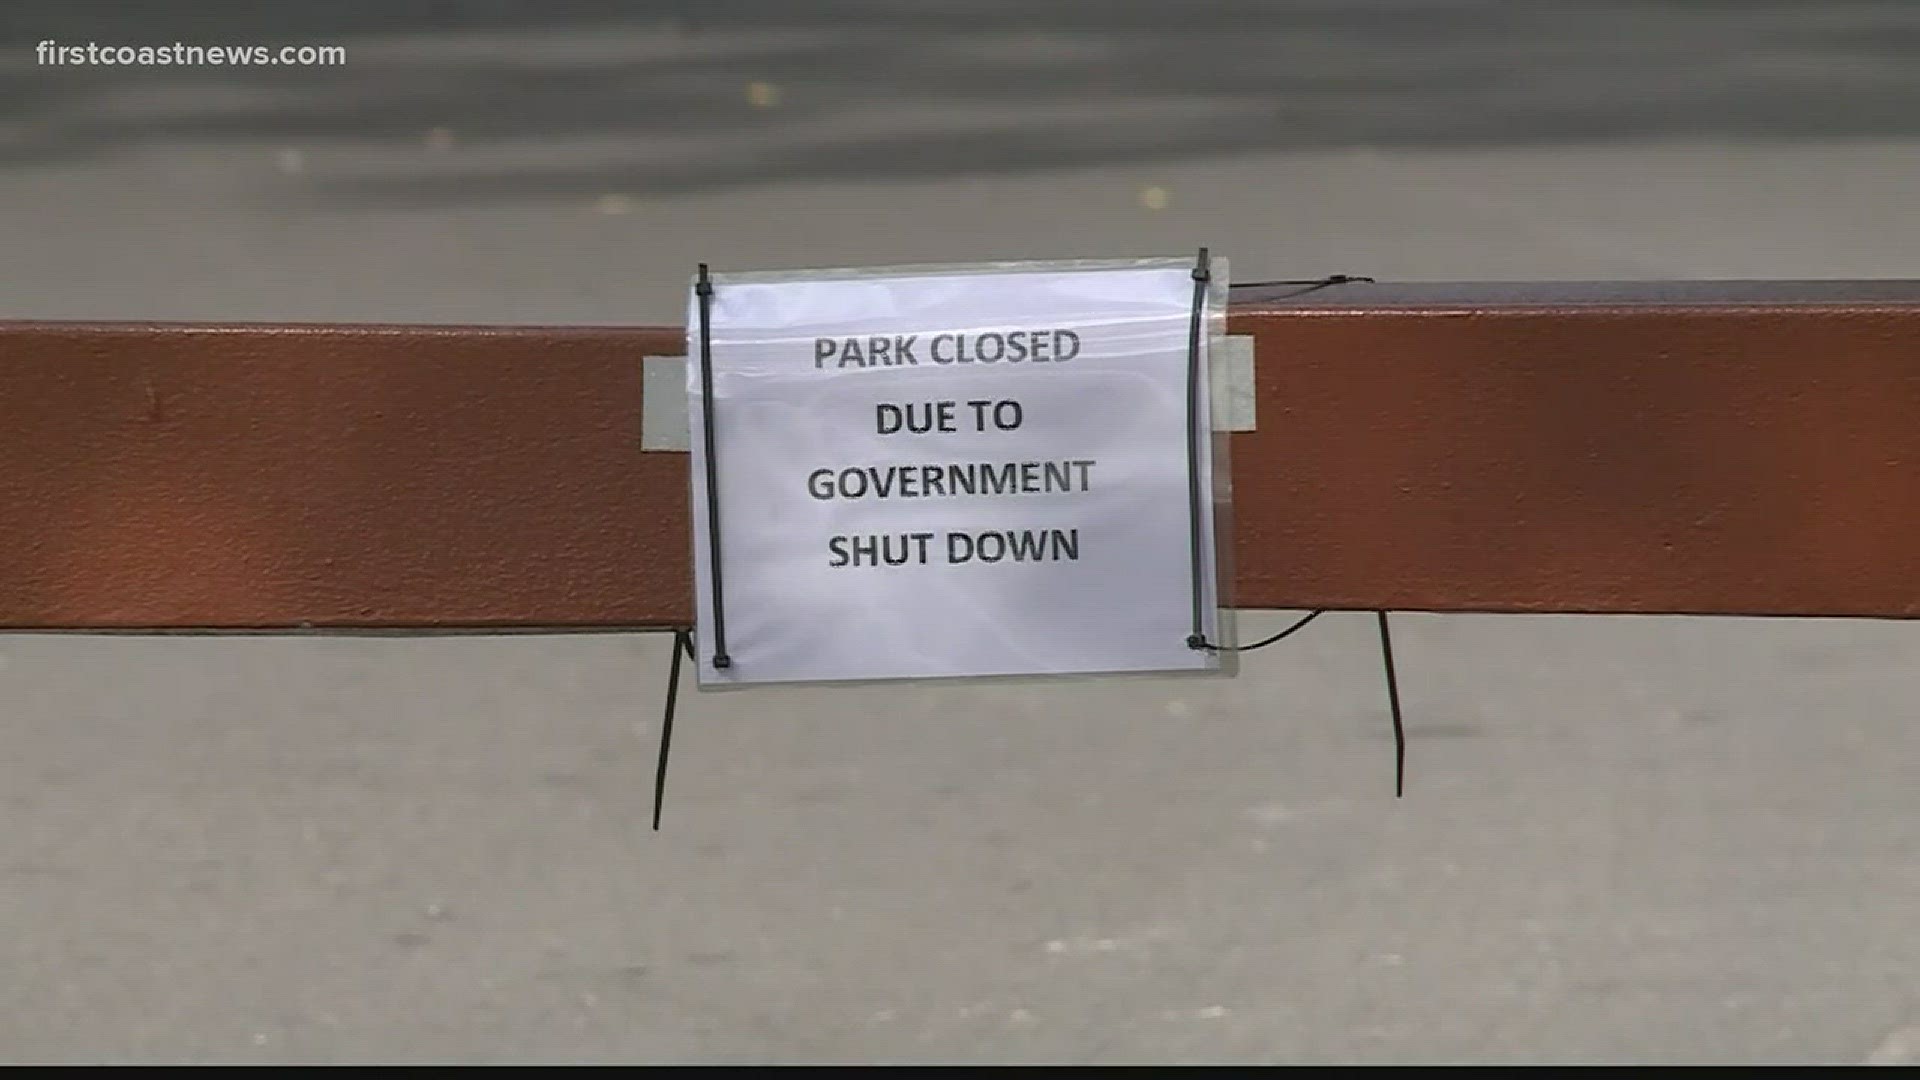 Government shutdown impacting parks on the First Coast